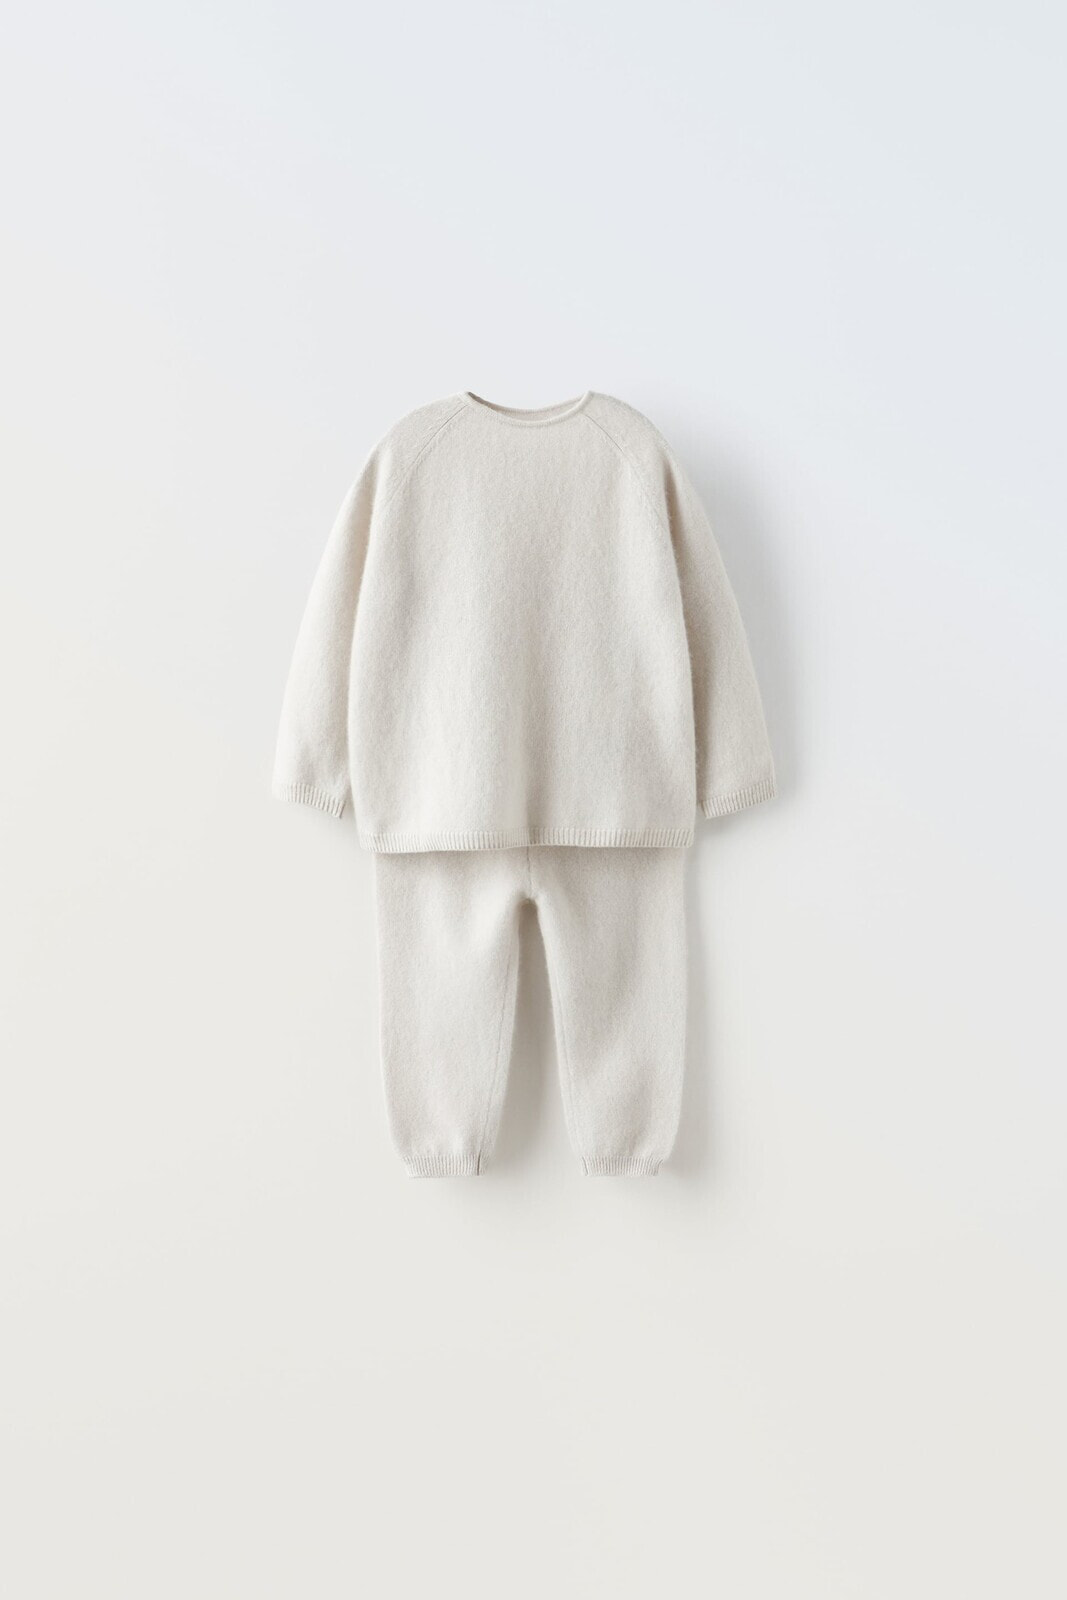 100% cashmere sweater and trousers co-ord